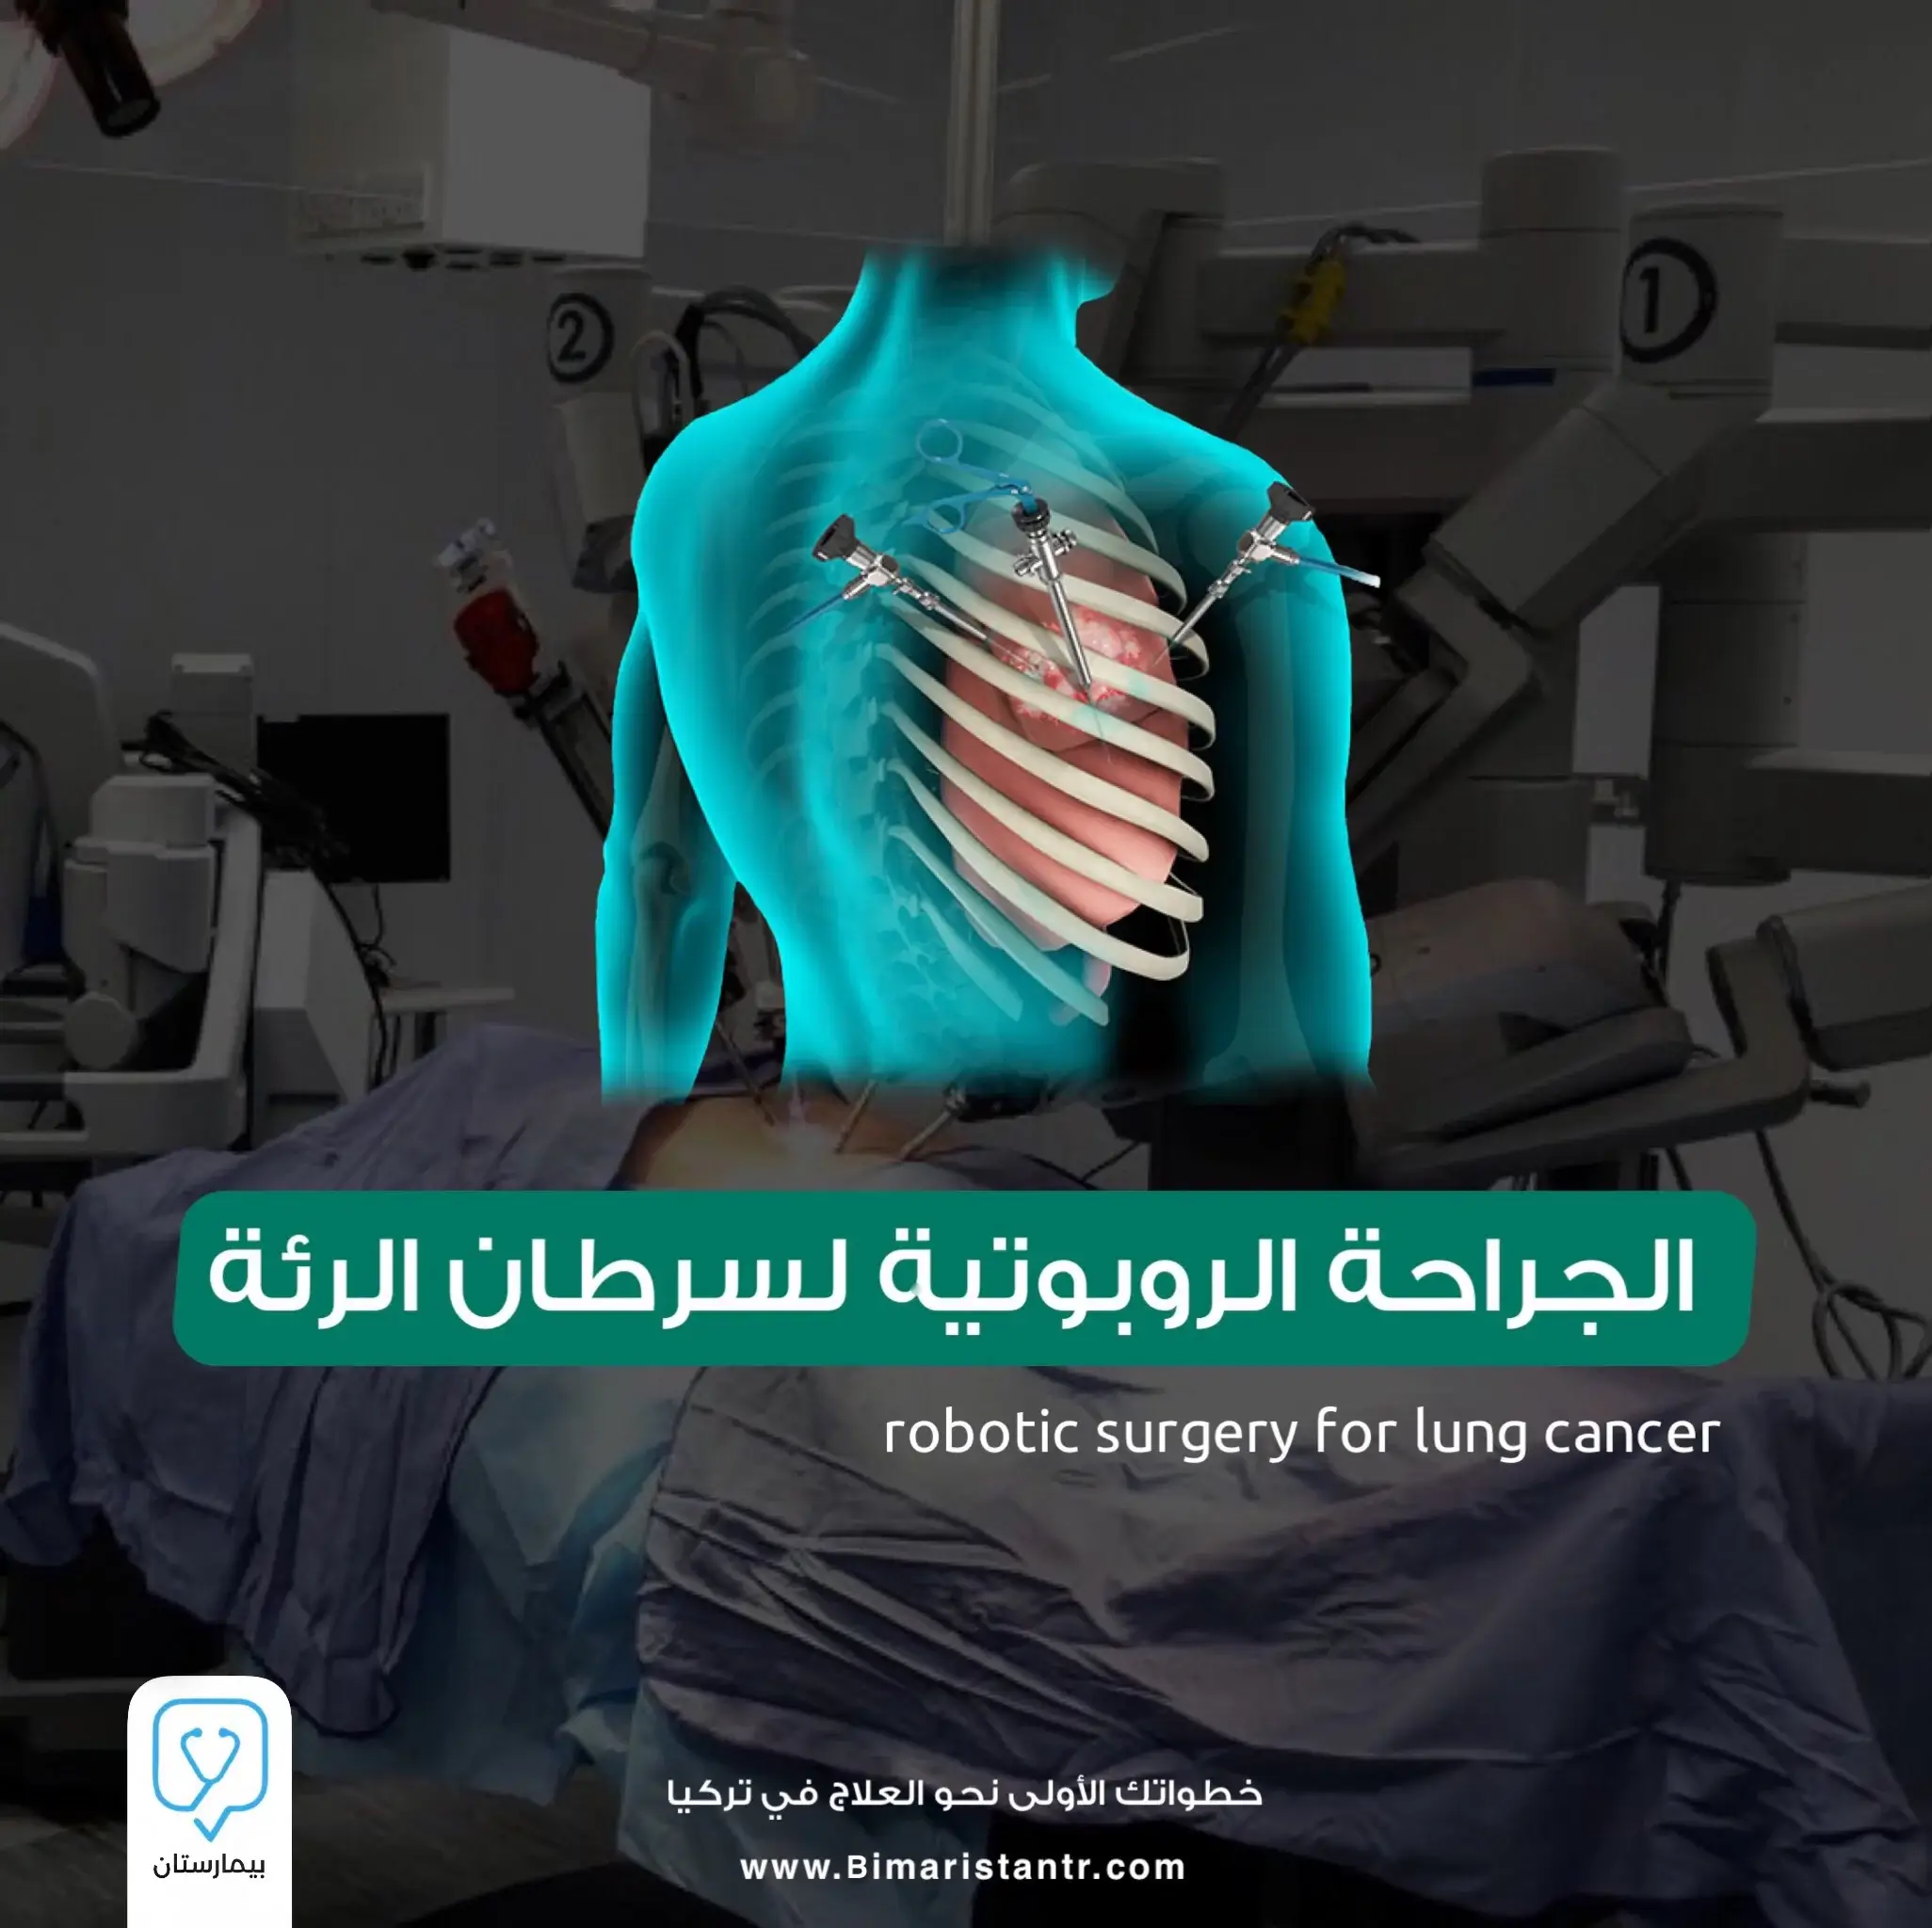 Robotic surgery for lung cancer